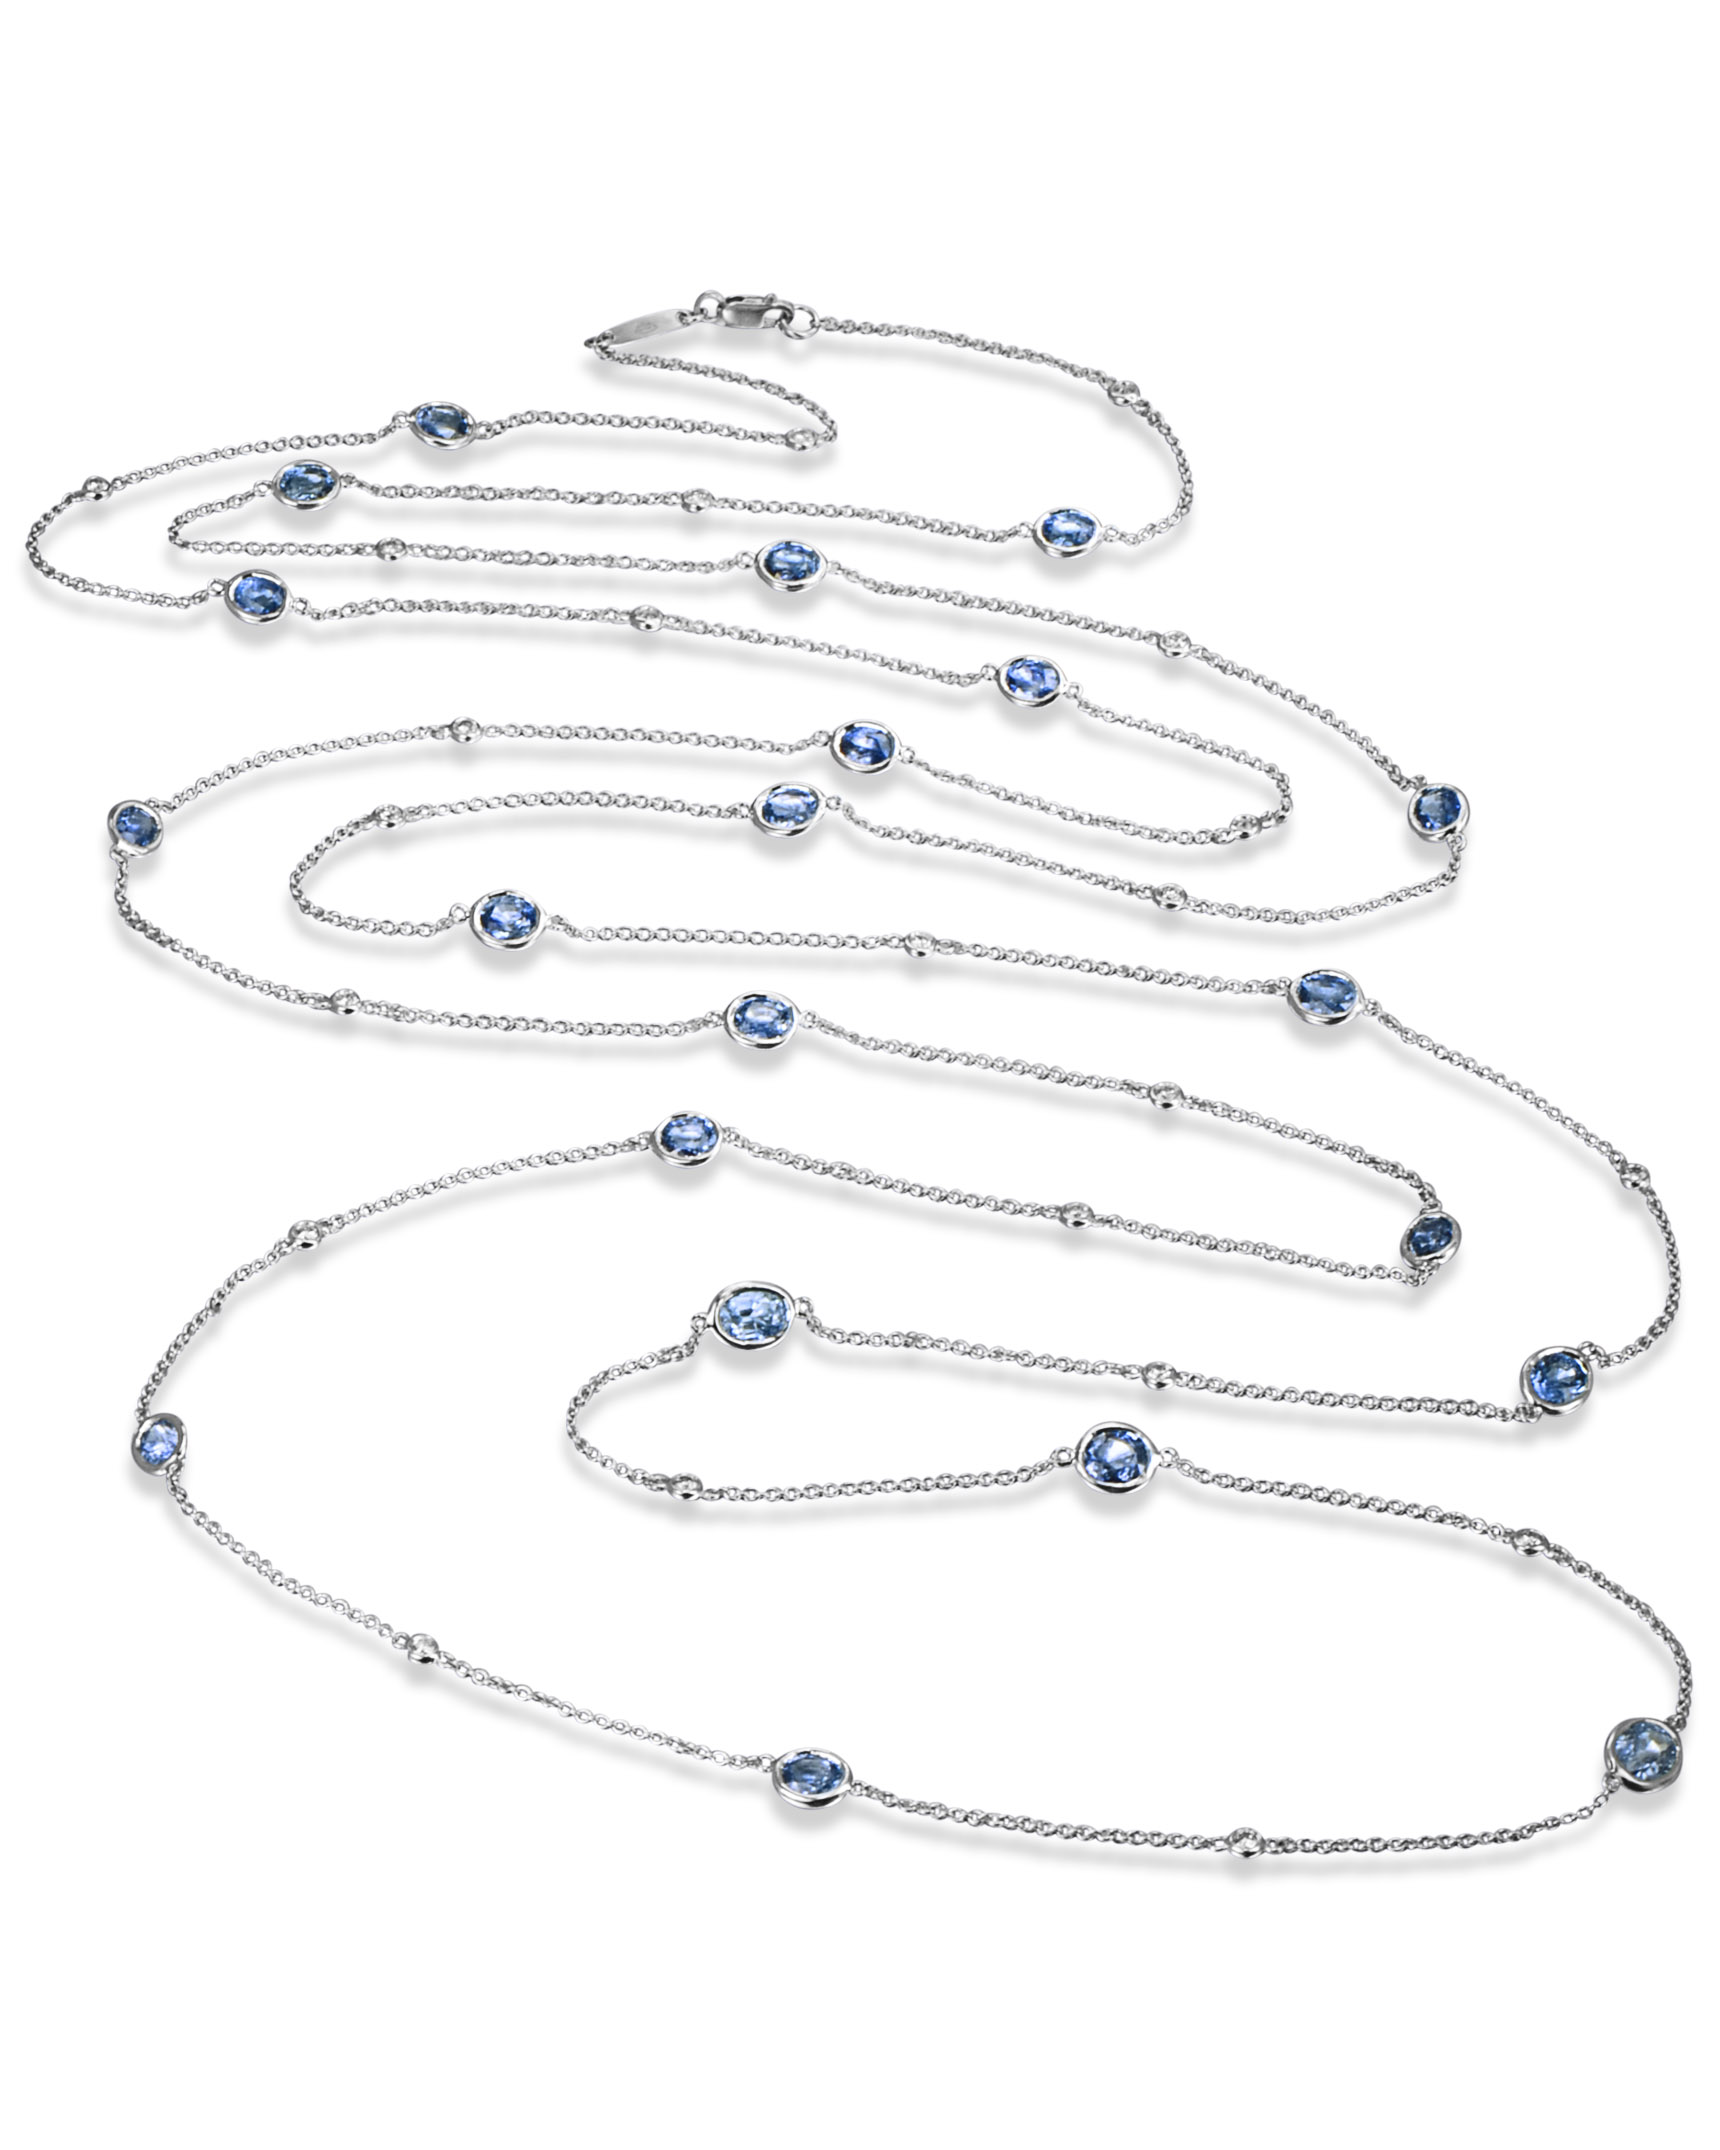 Blue Sapphire and Diamond White Gold Cable Chain Necklace - Turgeon Raine